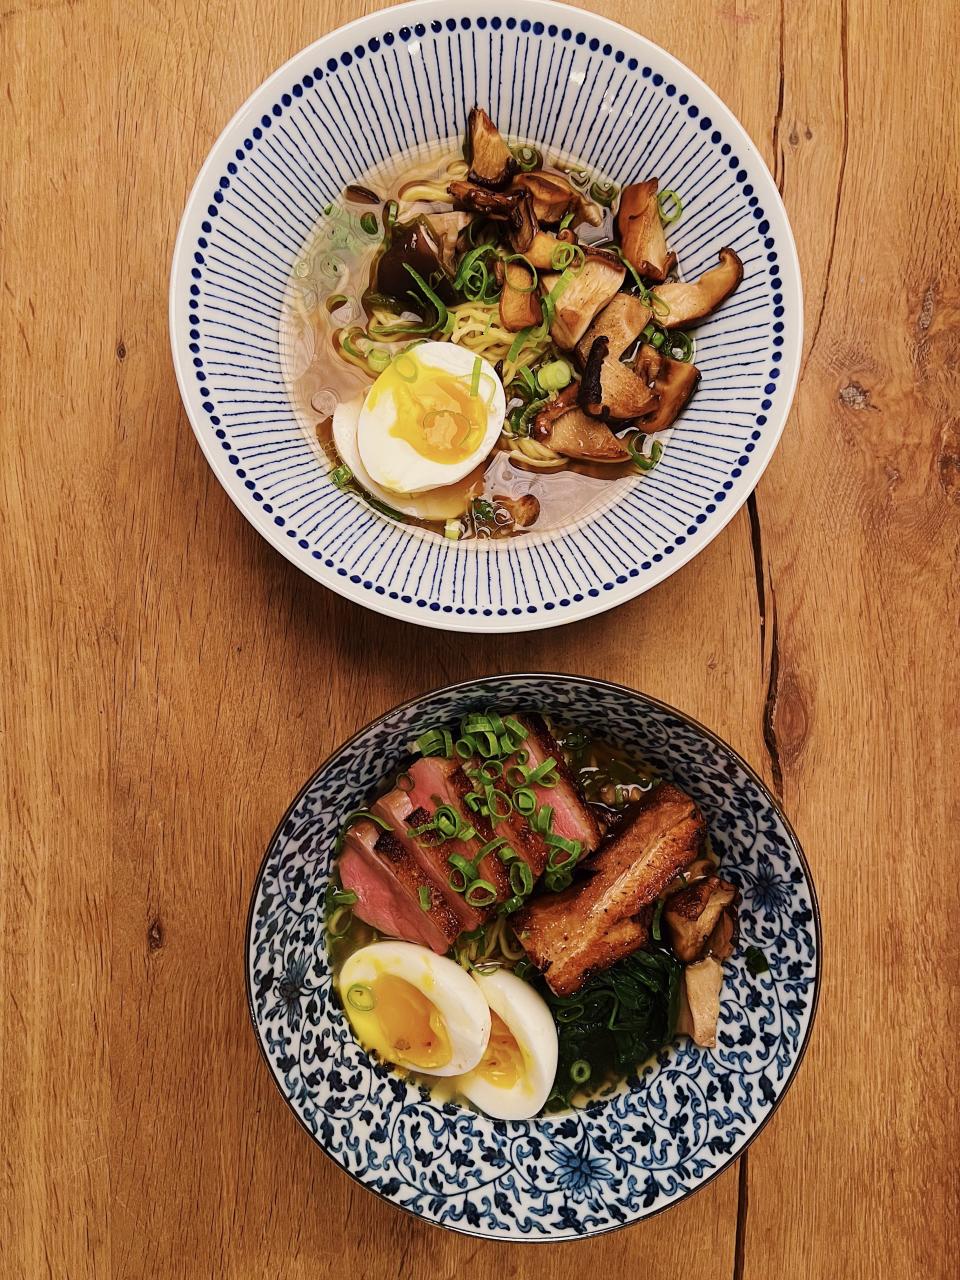 Ramen dishes by Kitsune, which began a partnership in December 2022 to serve its Japanese soul food at Talta Lodge in Stowe.